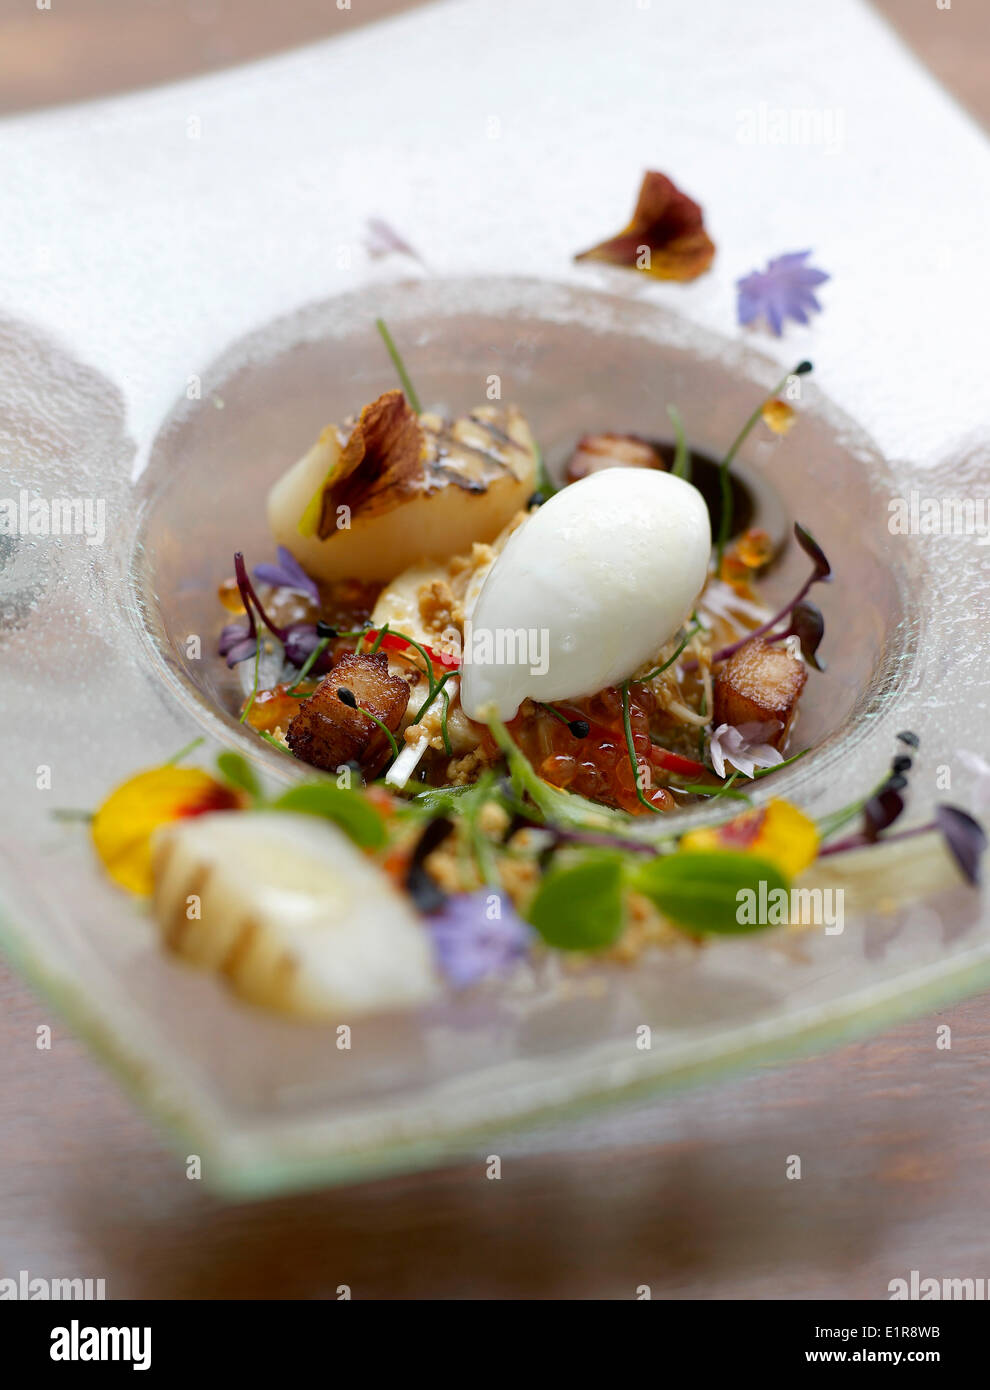 Grilled scallop,sauteed diced potato,sprout and edible flower salad Stock Photo